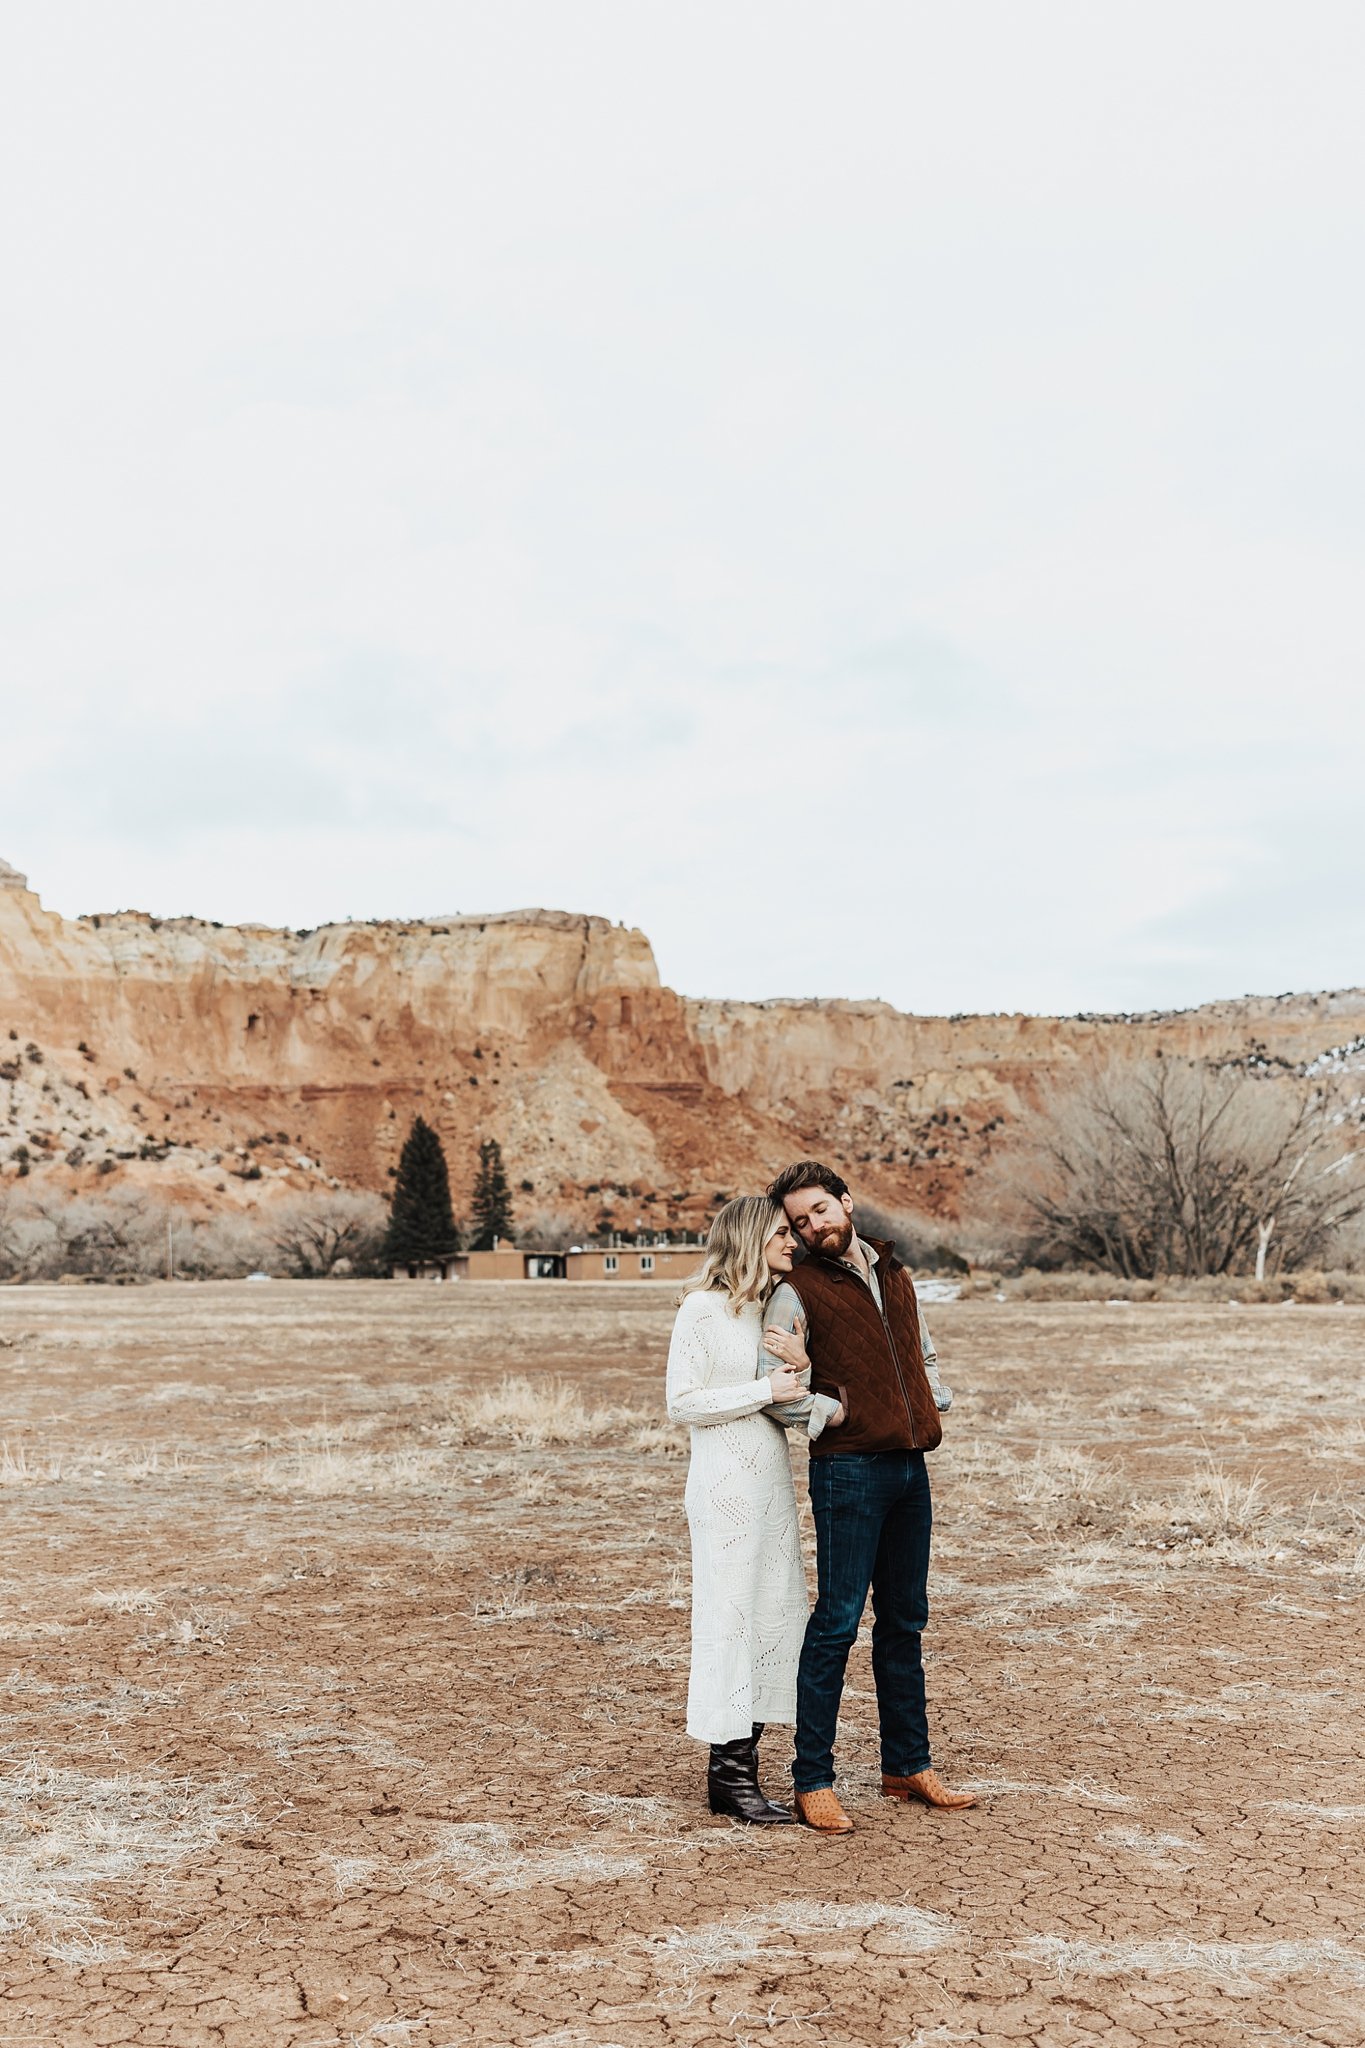 Alicia+lucia+photography+-+albuquerque+wedding+photographer+-+santa+fe+wedding+photography+-+new+mexico+wedding+photographer+-+new+mexico+wedding+-+southwest+engagement+-+ghost+ranch+engagement+-+ghost+ranch+wedding_0012.jpg